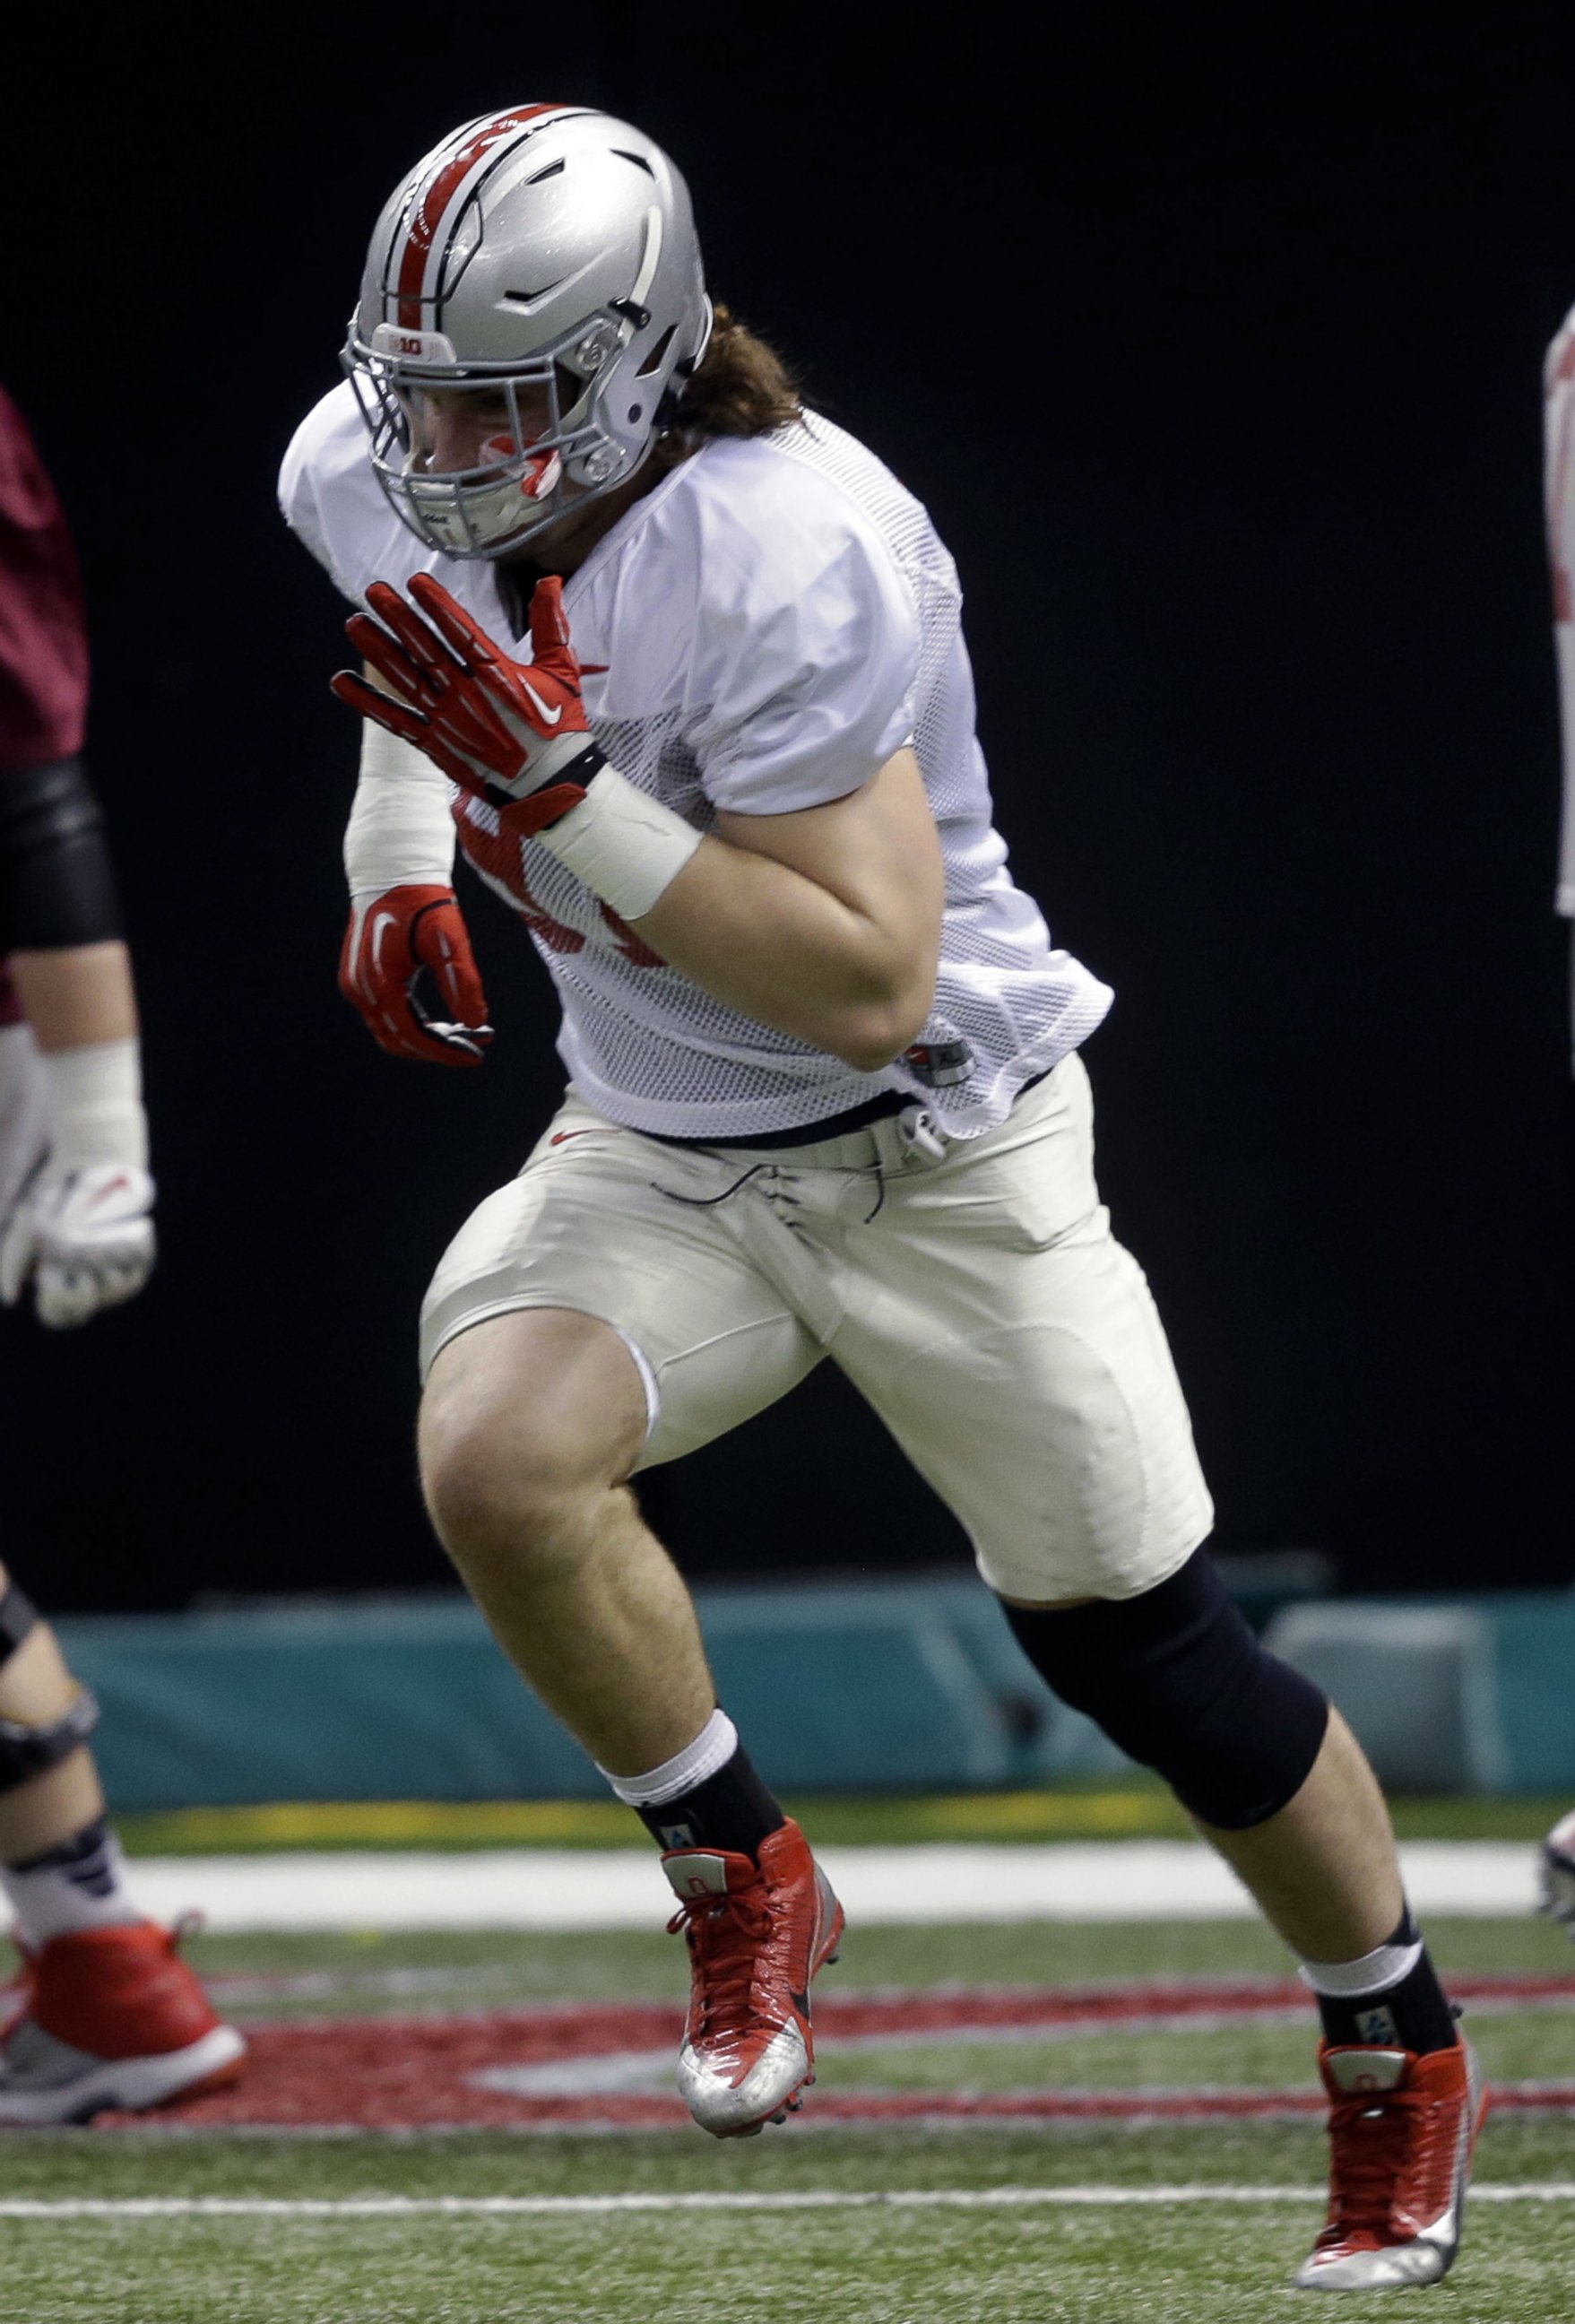 Ohio State defensive lineman Joey Bosa sprints during NCAA college football practice at the Mercedes-Benz Superdome in New Orleans, La., Sunday, Dec. 28, 2014. Ohio State is scheduled to play Alabama in the Sugar Bowl on Jan. 1, 2015.